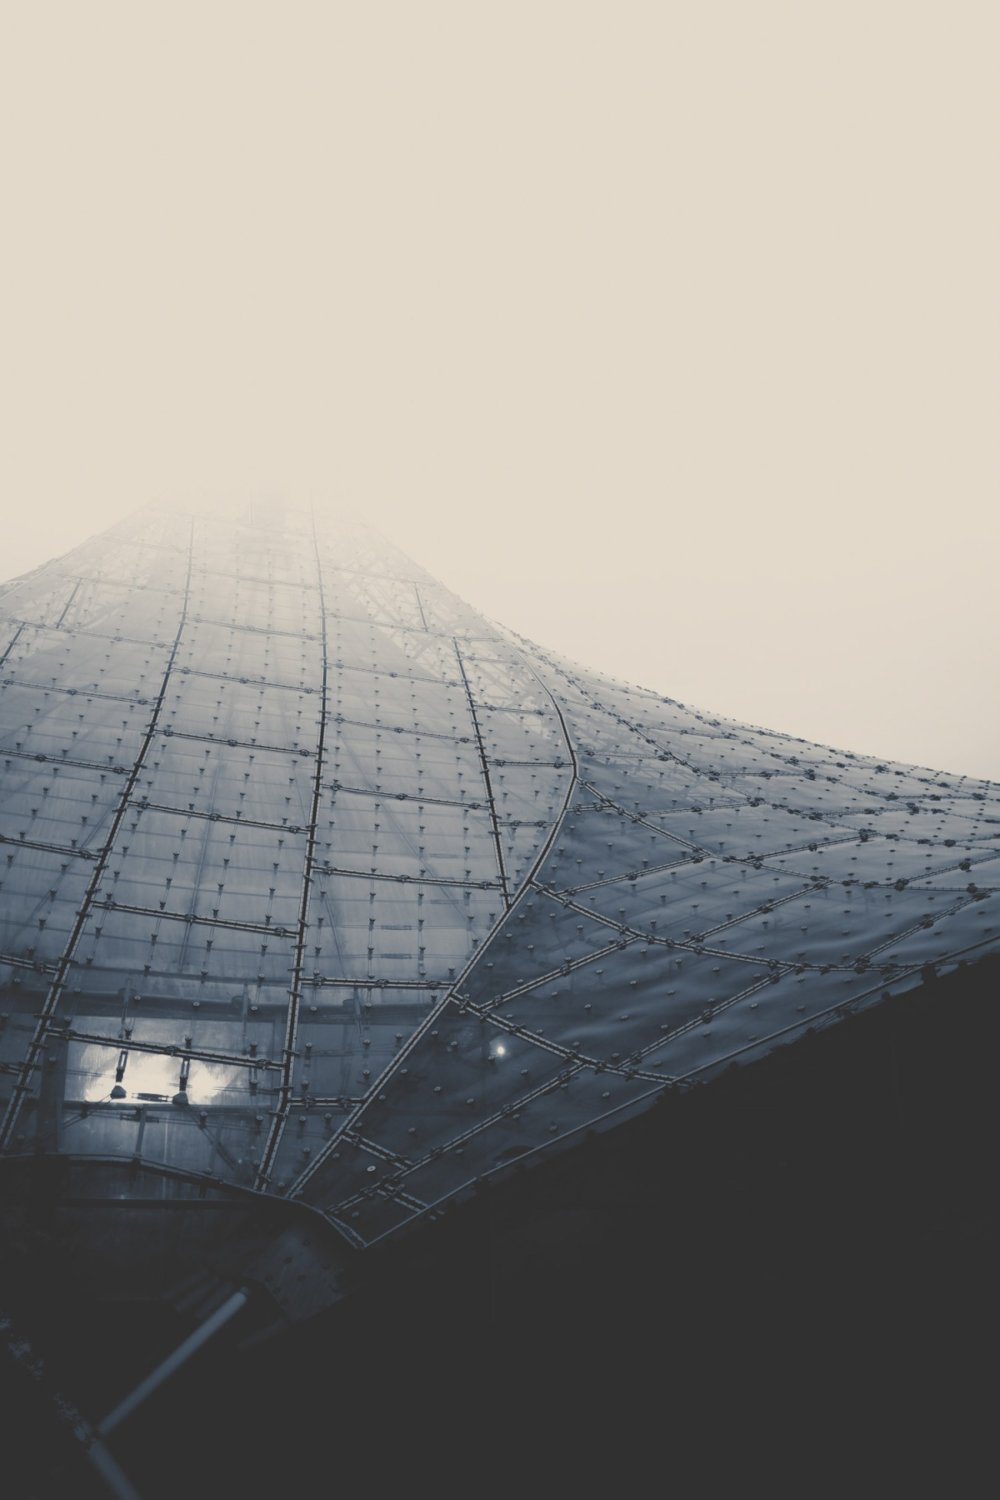 Spaceships Minimal And Futuristic Architecture Photograph Series By Lars Stieger 4